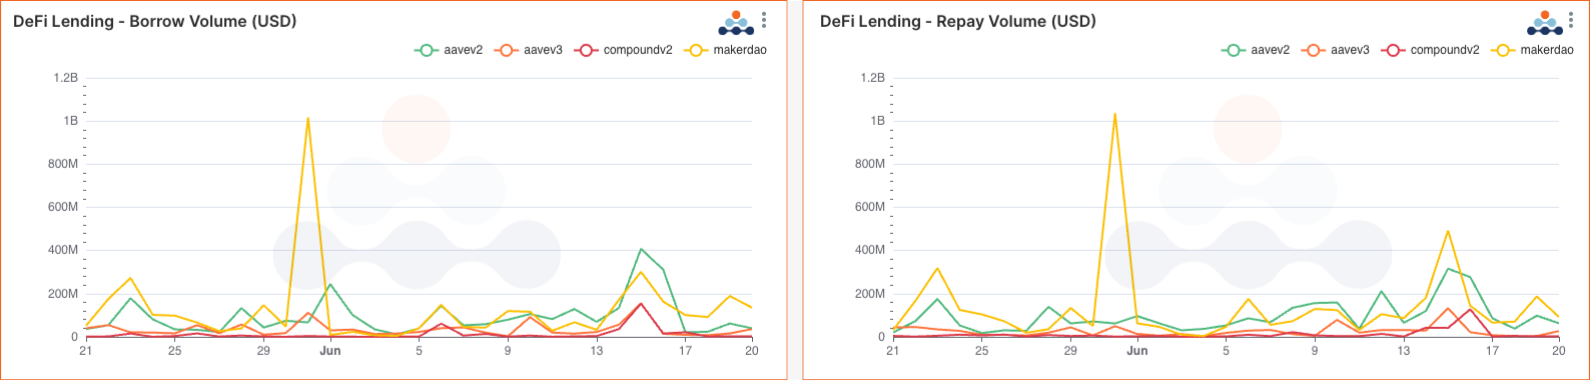 DeFi Lending protocol deposit, withdraw, borrow, and repay volumes over the last 30 days. Borrow volume and repay volume USD